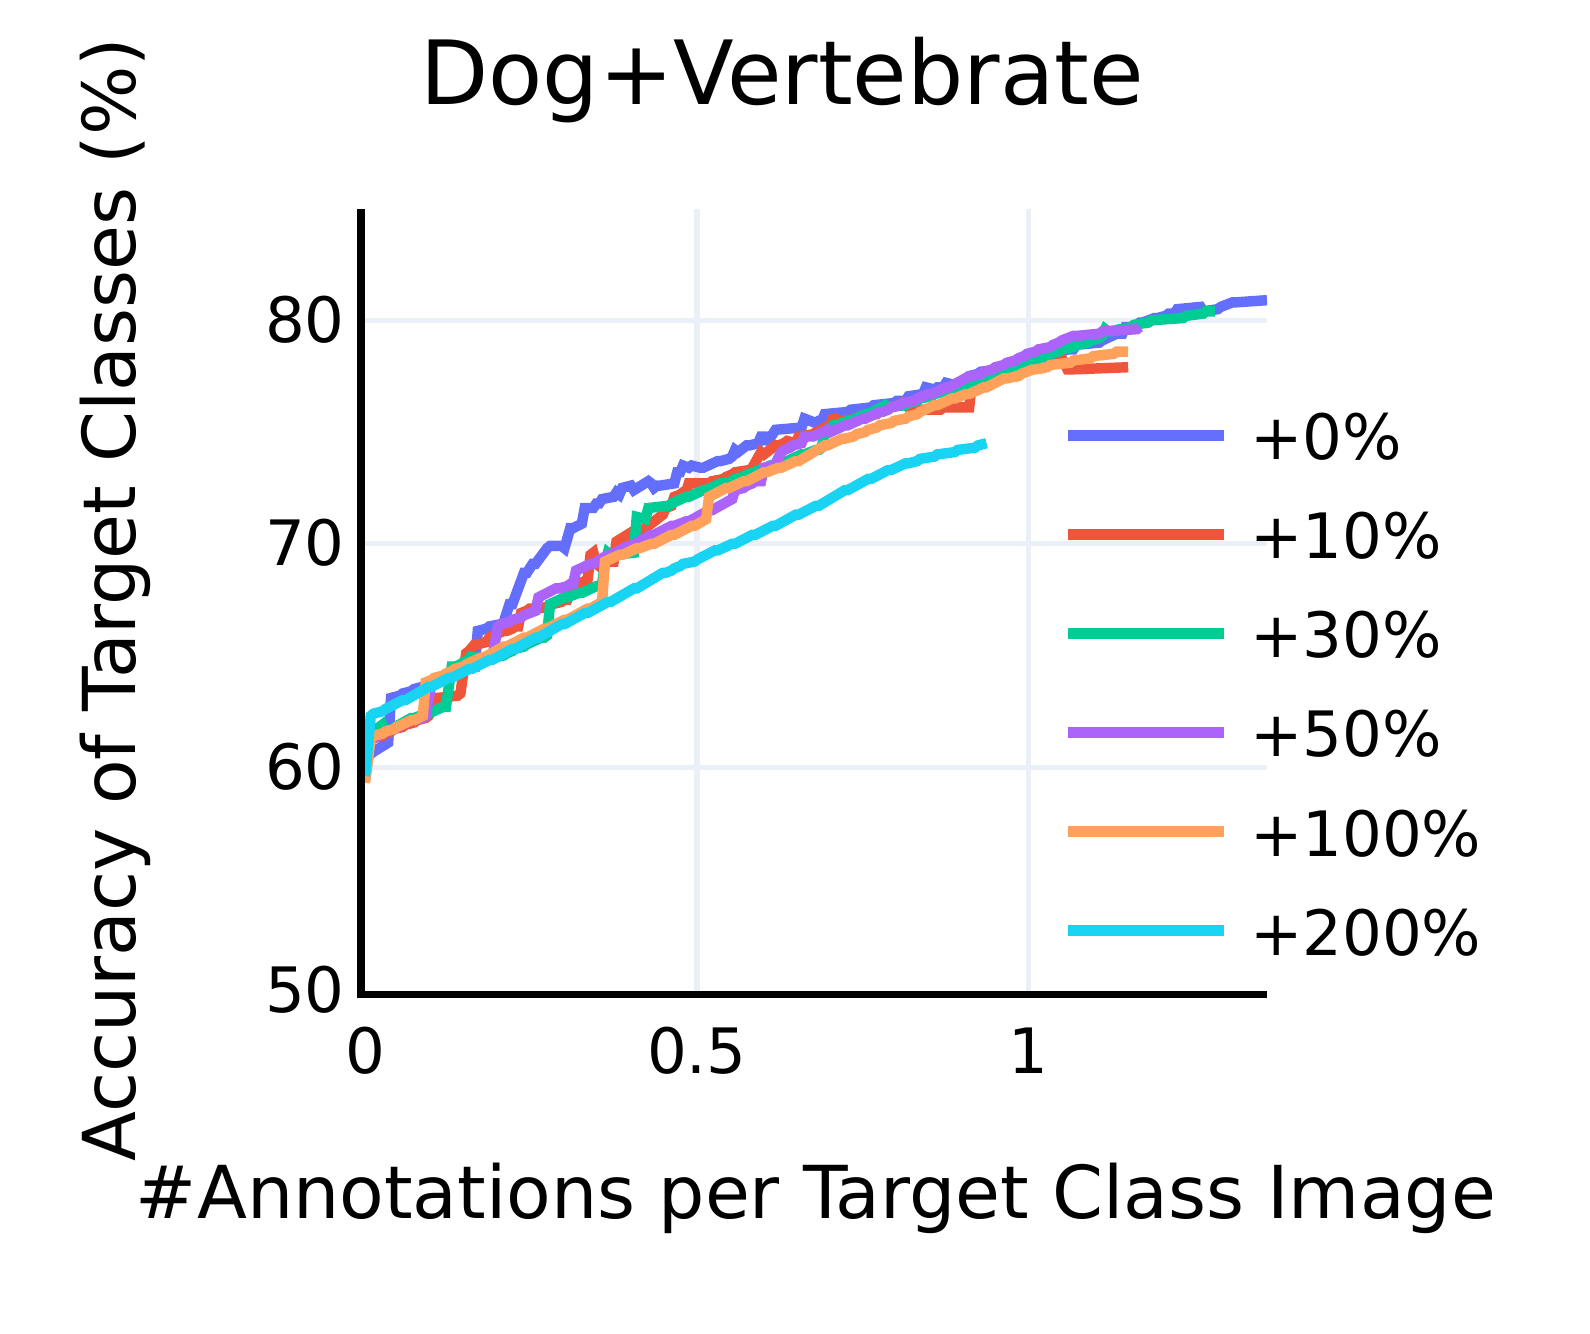 We intentionally add some irrelevance images from other classes to mimic the real-world cases. In our experiments, we find that even with 100% more images from irrelevant classes, we can still retain comparable efficiency.